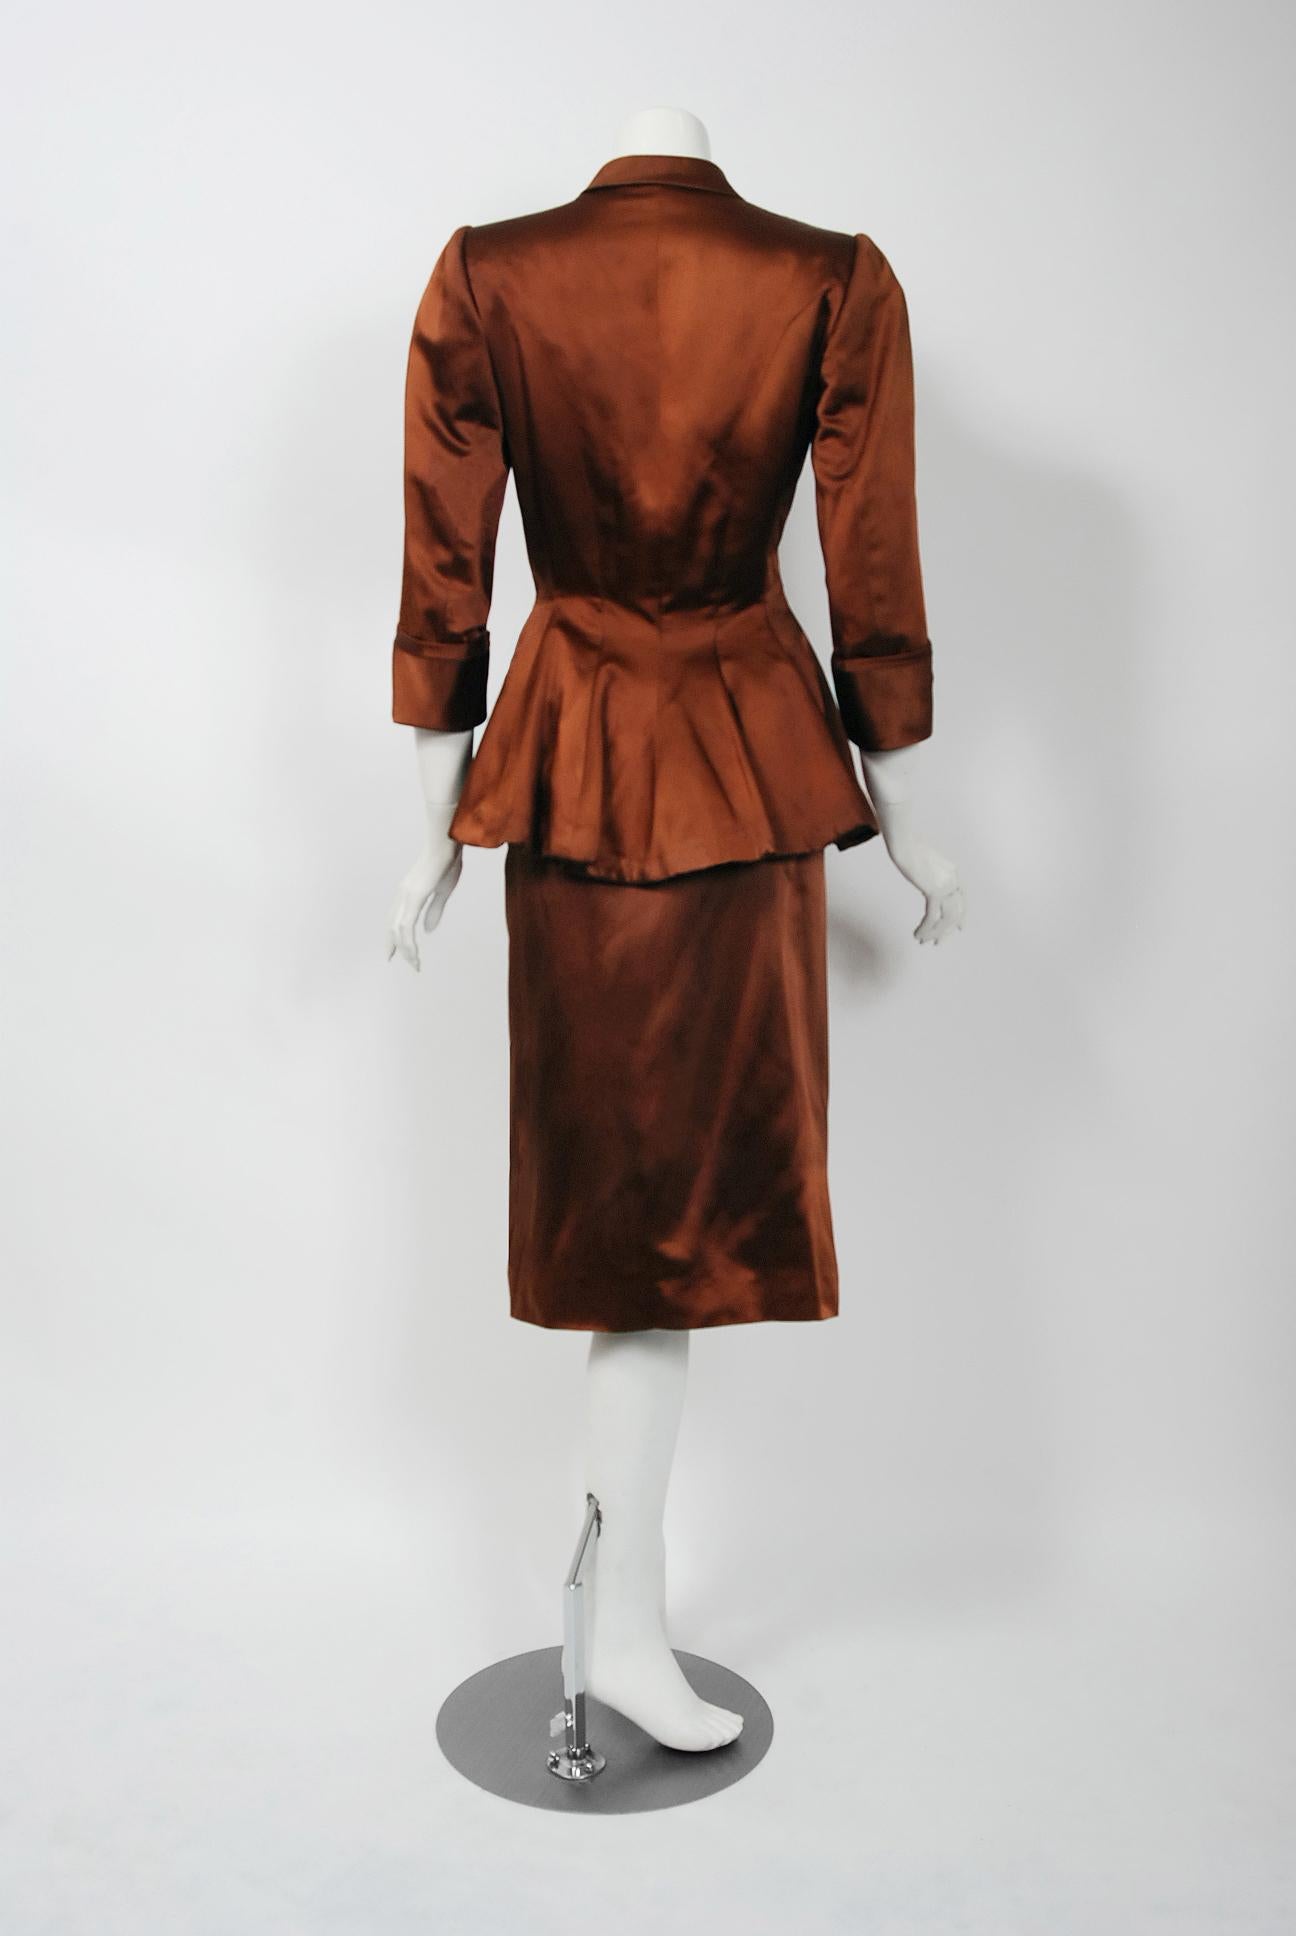 Brown 1946 Balenciaga Haute-Couture Copper Satin Tailored Peplum Jacket and Skirt Suit